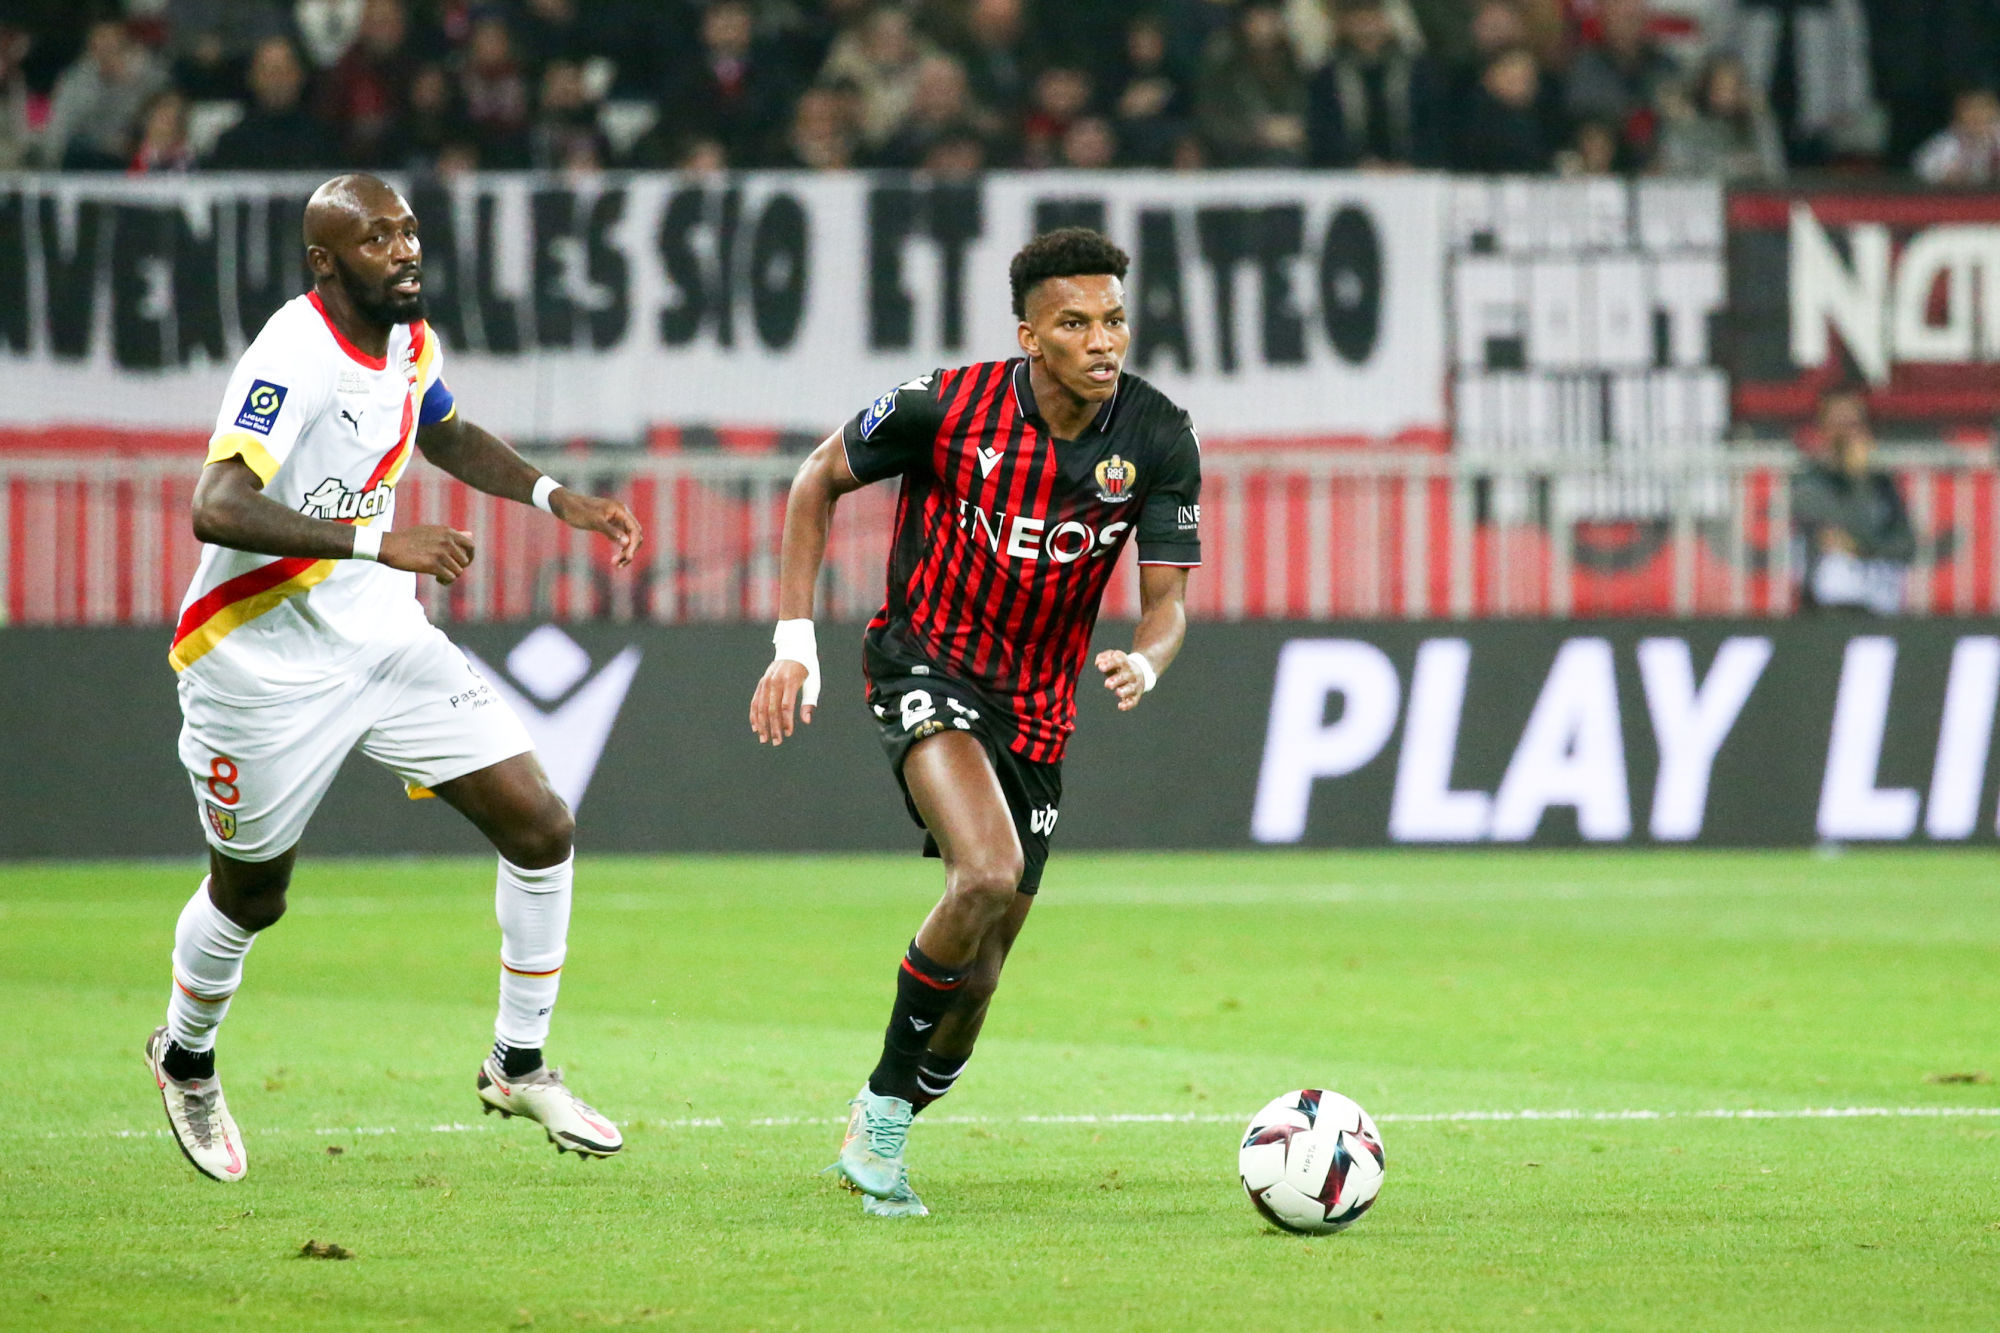 08 Seko FOFANA (rcl) - 28 Hicham BOUDAOUI (ogcn) during the Ligue 1 Uber Eats match between Nice and Lens at Allianz Riviera on December 29, 2022 in Nice, France. (Photo by Serge Haouzi/FEP/Icon Sport)